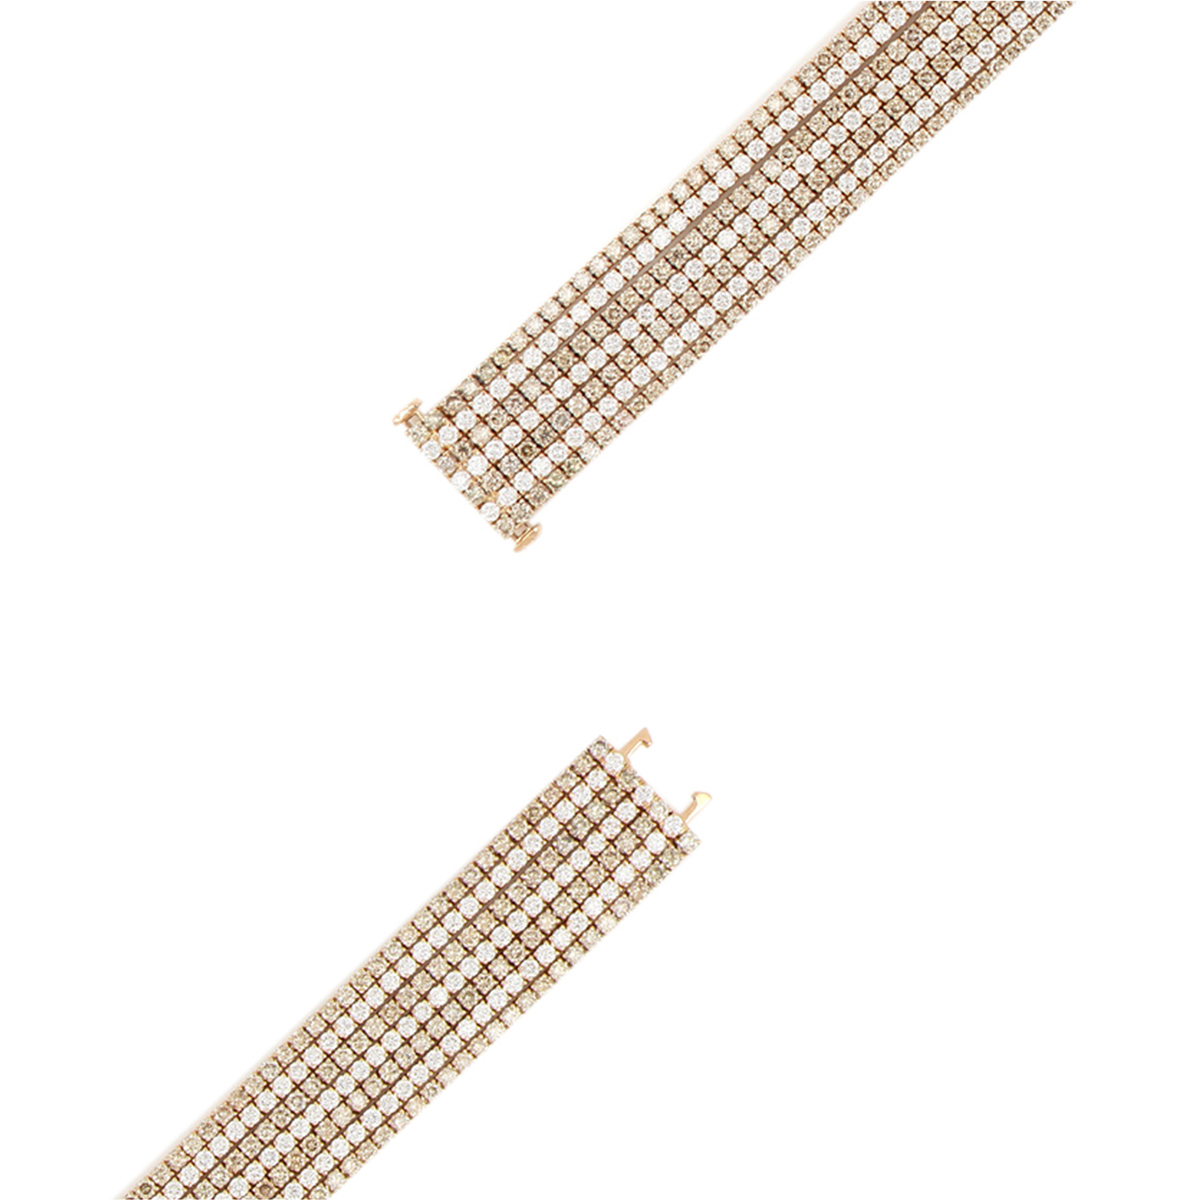 Wide Link Bracelet with White and Brown Diamonds